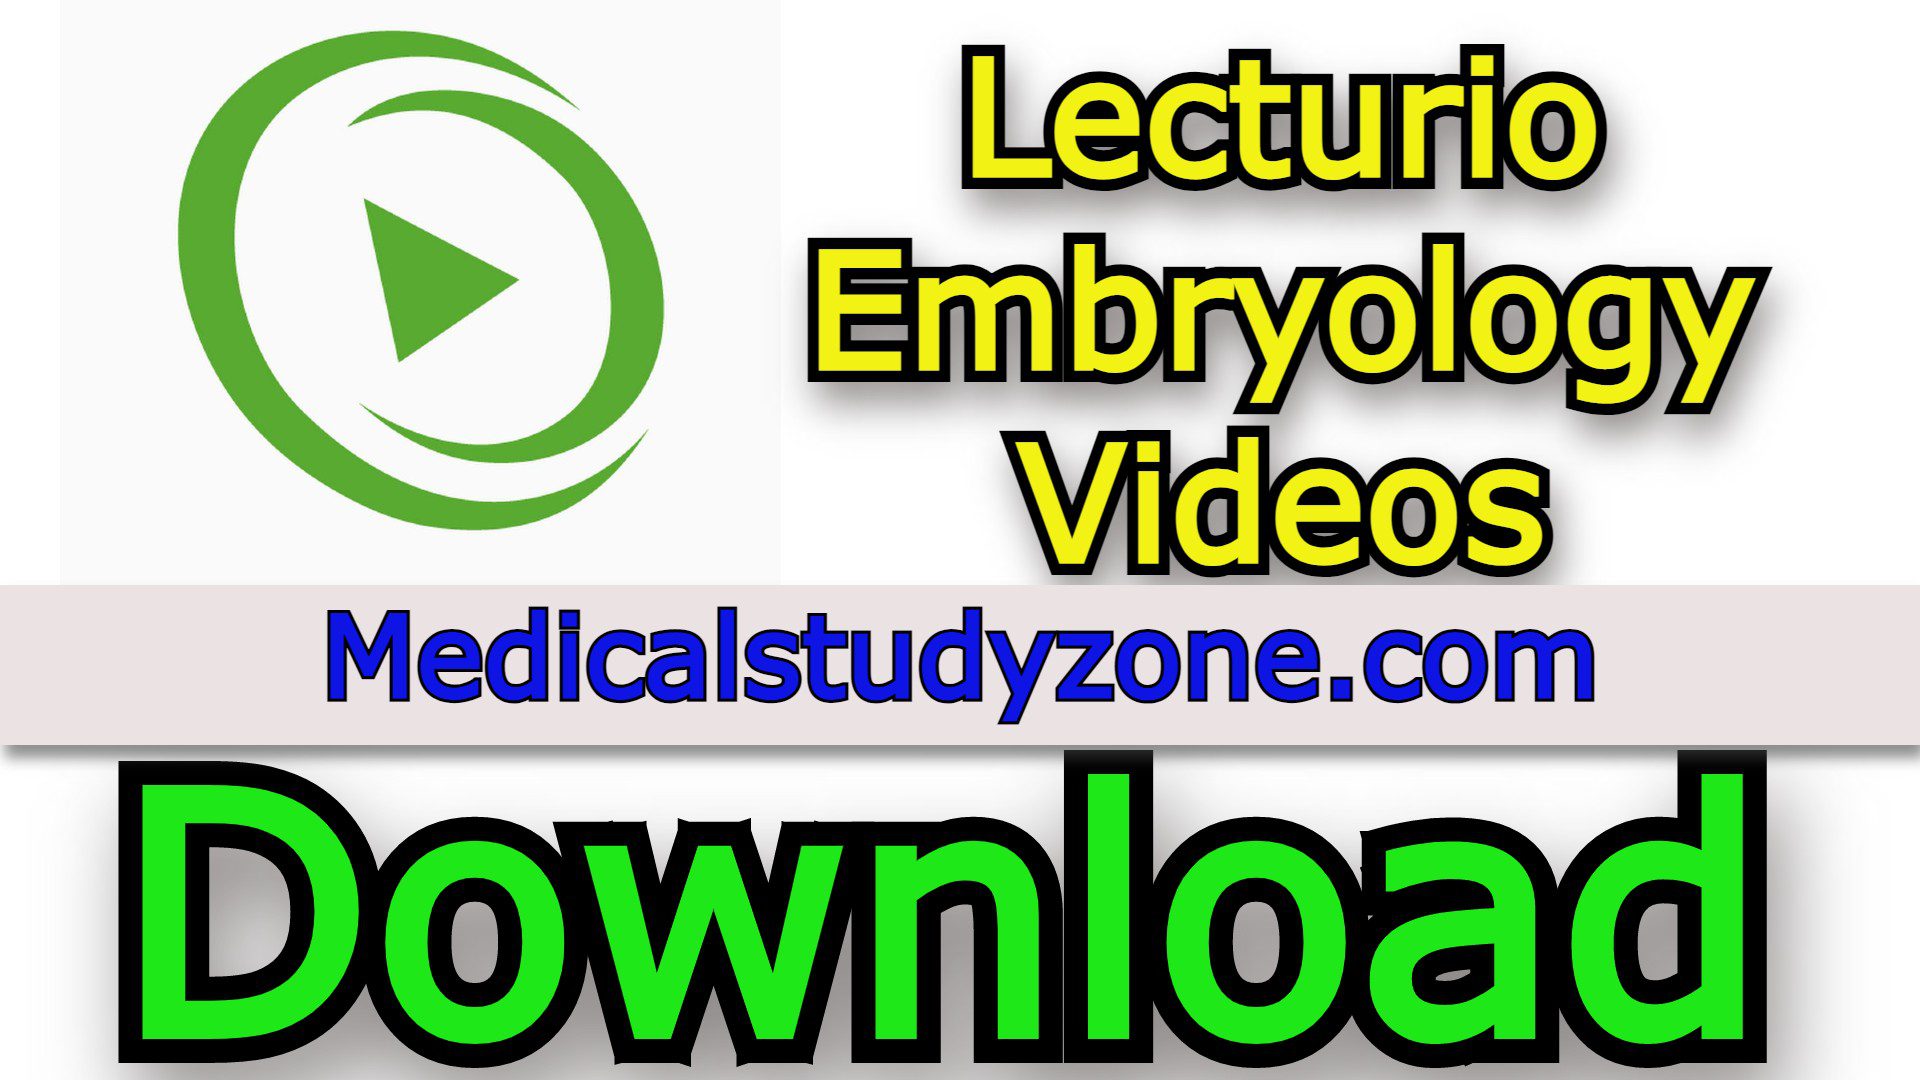 Lecturio Embryology Videos 2022 Free Download